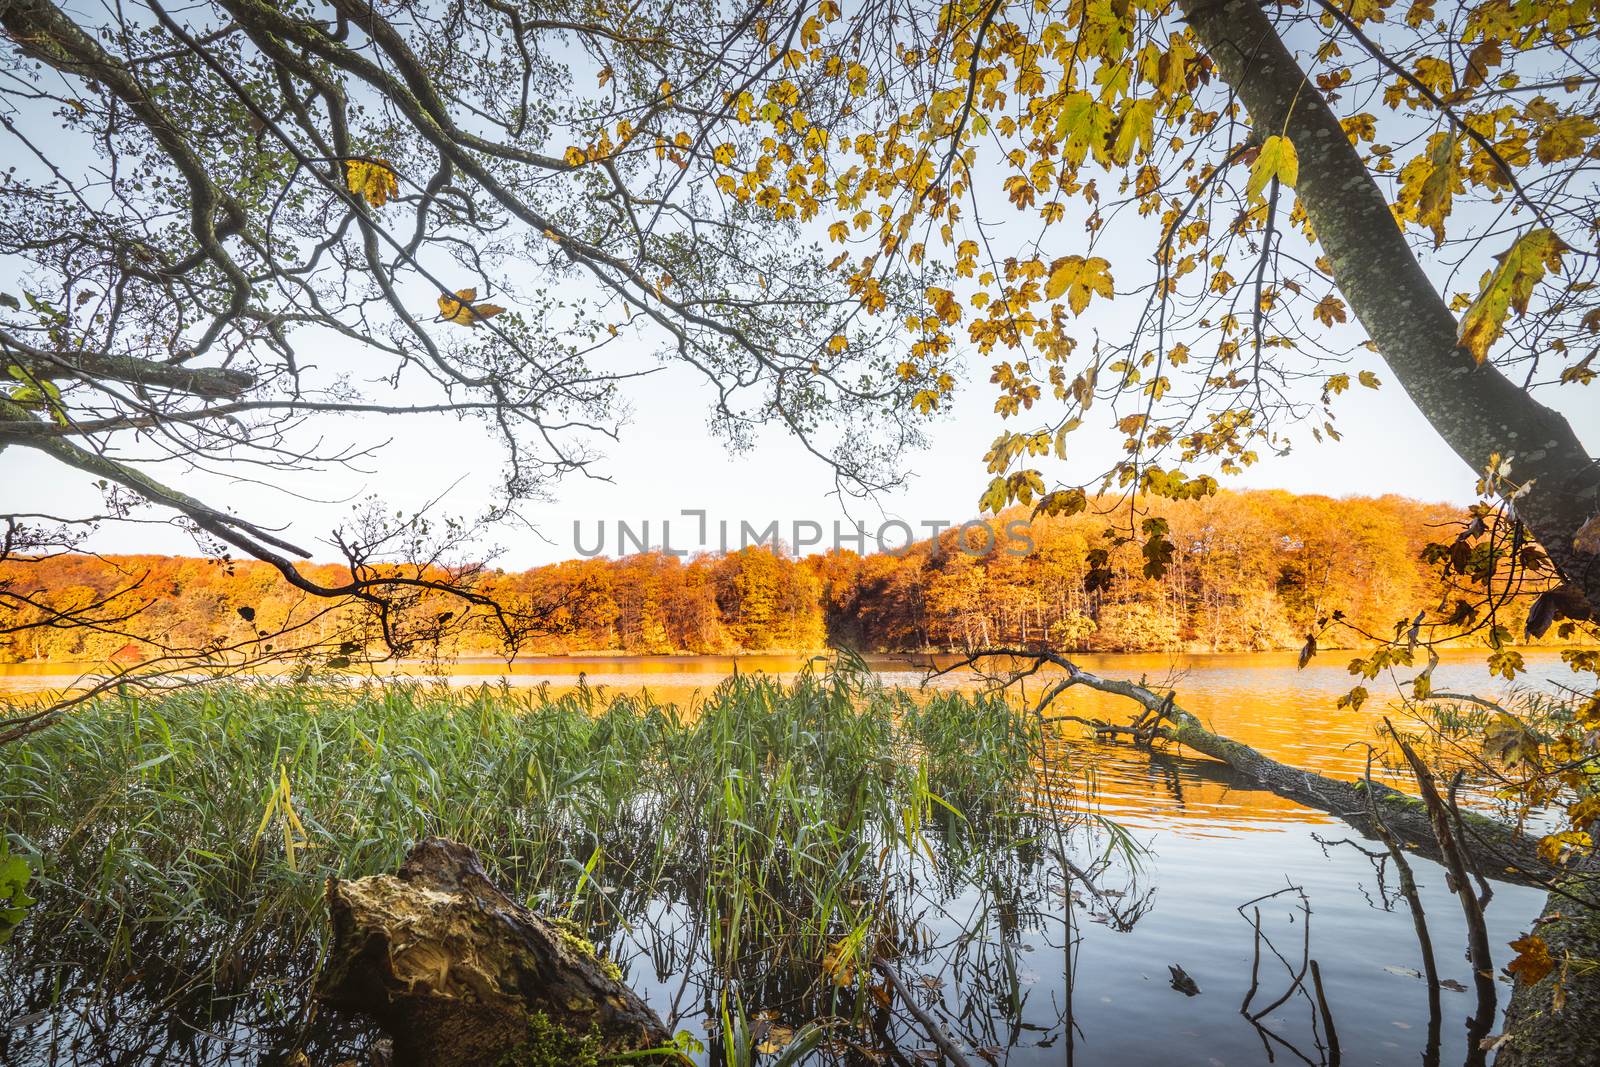 Colorful trees by a lake in the fall with a tree log in the water